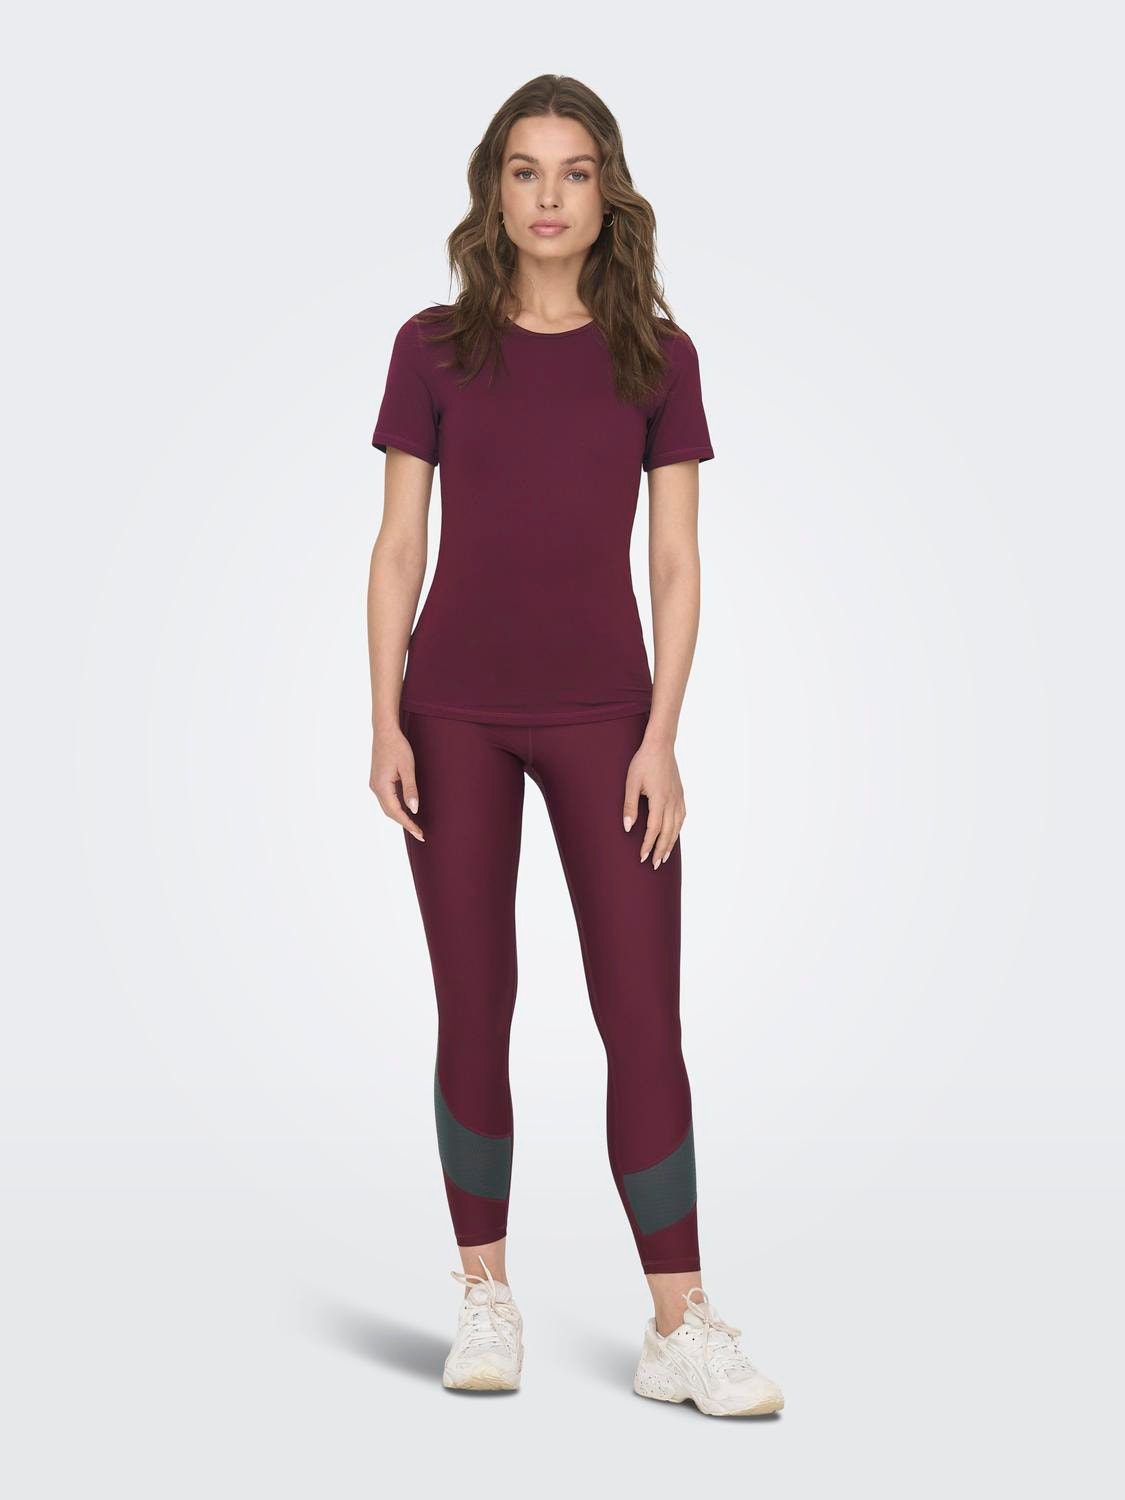 ONLY Solid colored Training Tee -Windsor Wine - 15283412